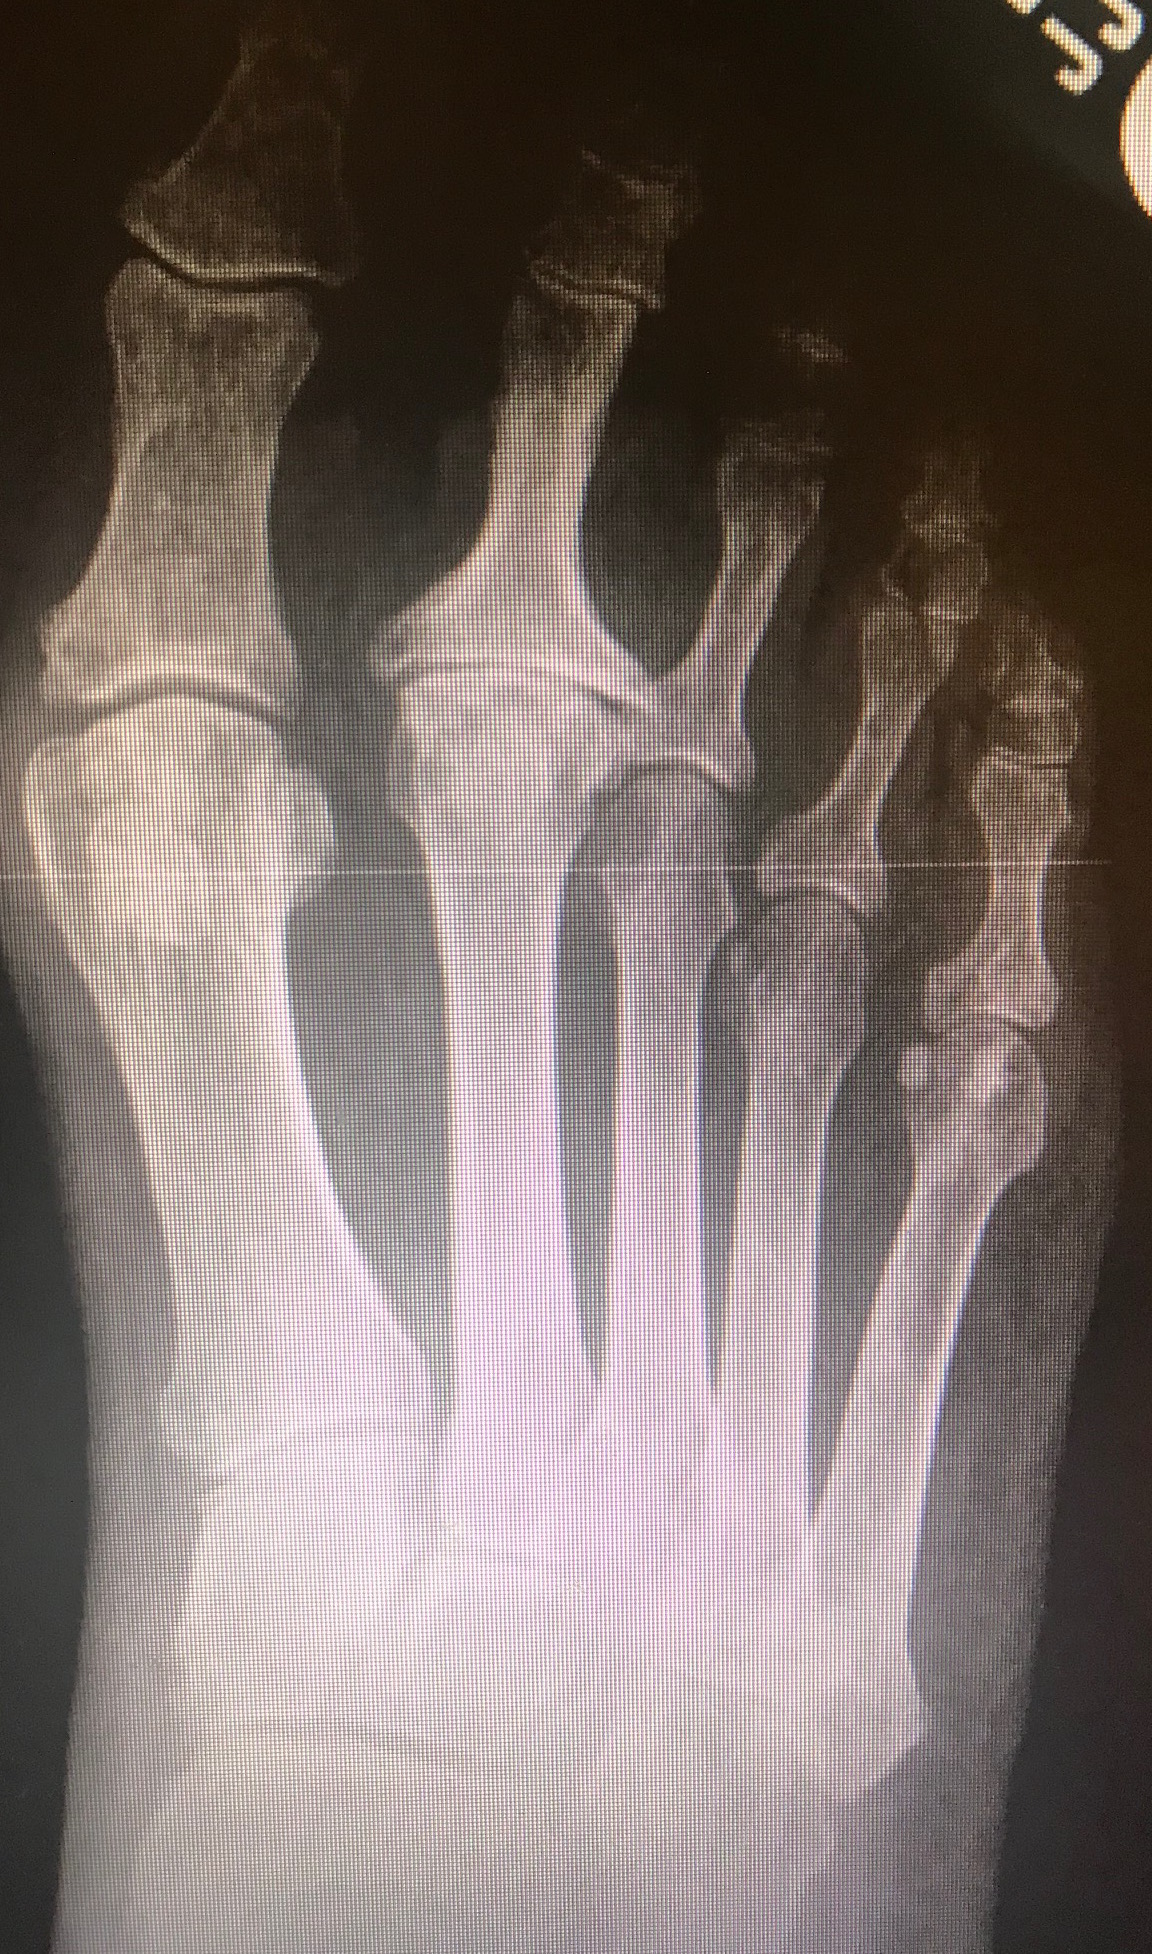 Dorsal-plantar radiograph of the foot with avascular necrosis of the second metatarsal head (Freibergs disease). Smillie classification stage 5 with severe arthrosis, metatarsal head flattening, sclerosis, and joint space obliteration. 